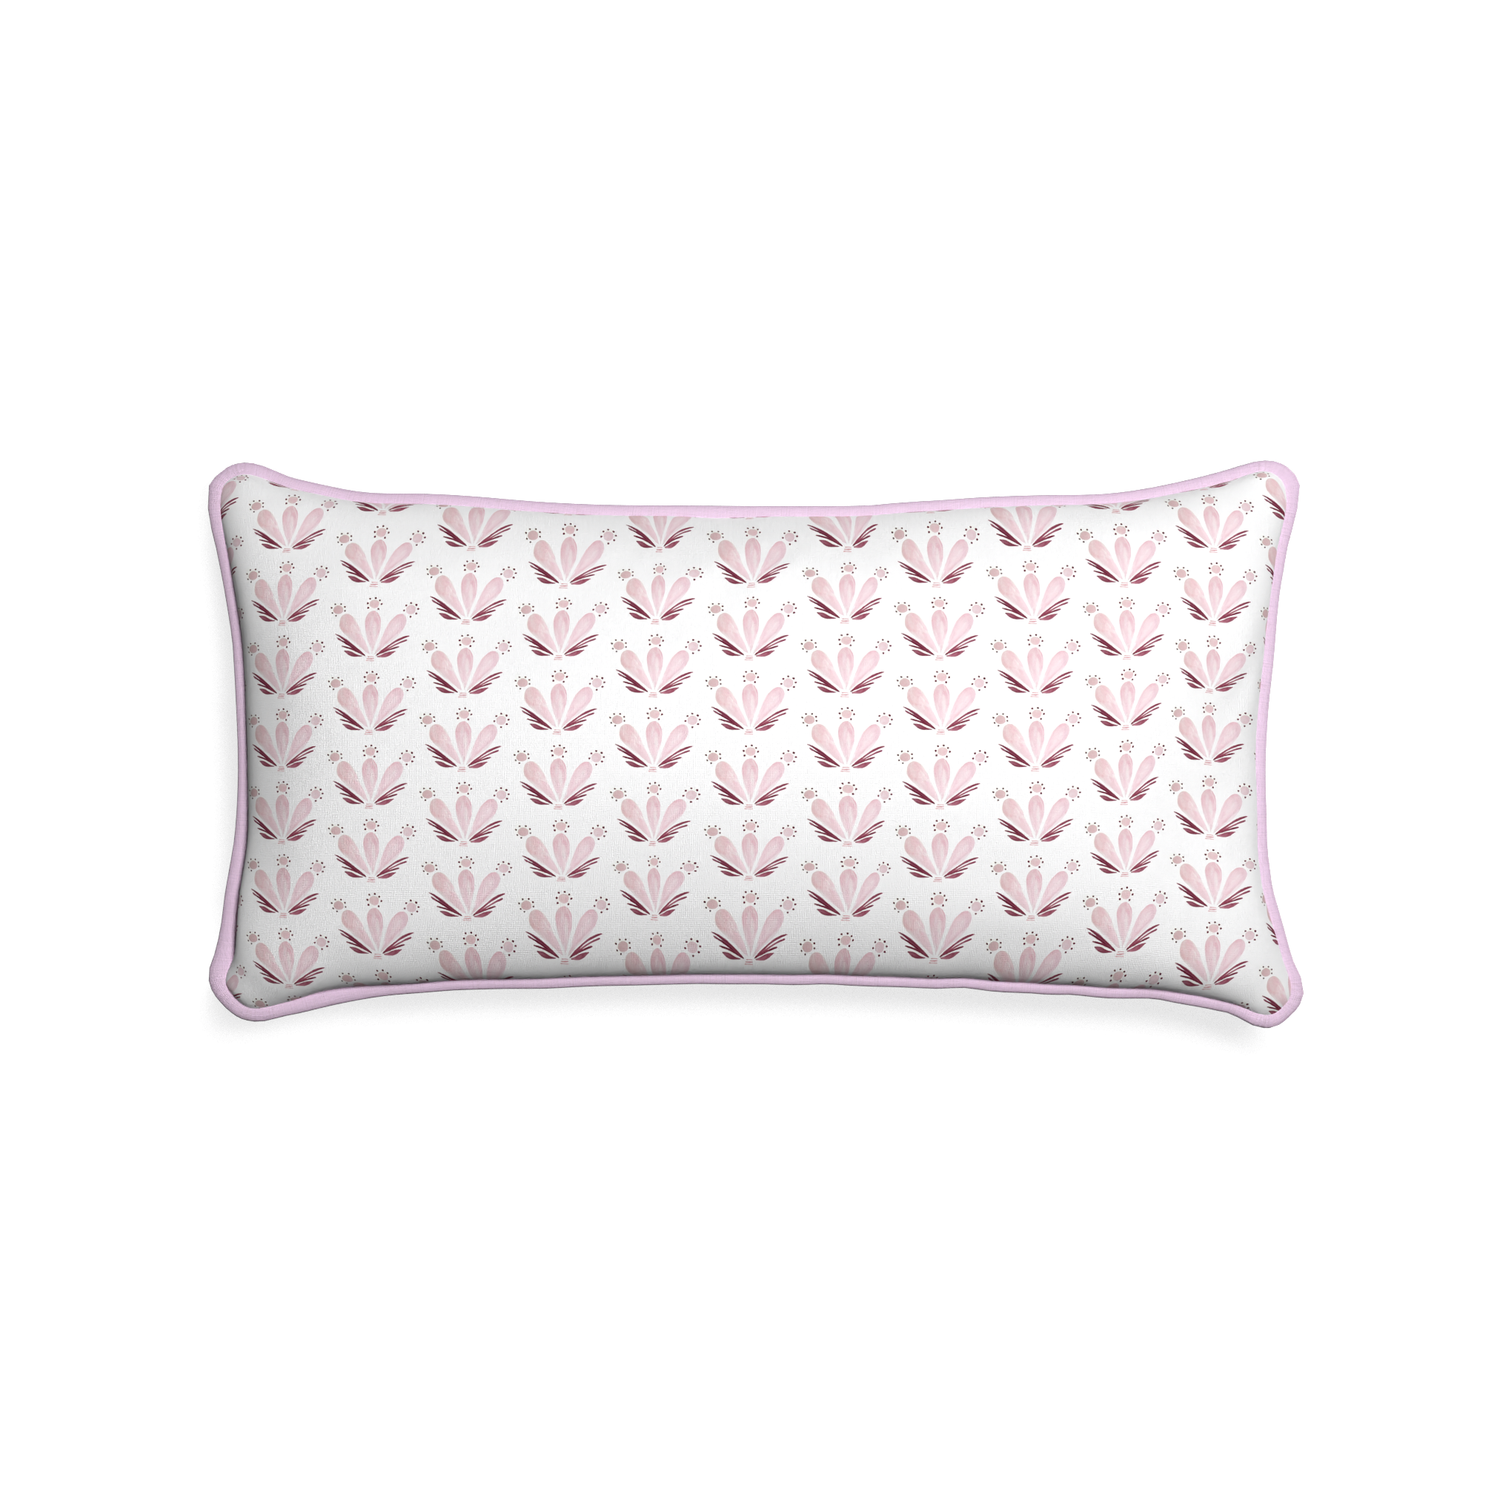 Midi-lumbar serena pink custom pink & burgundy drop repeat floralpillow with l piping on white background